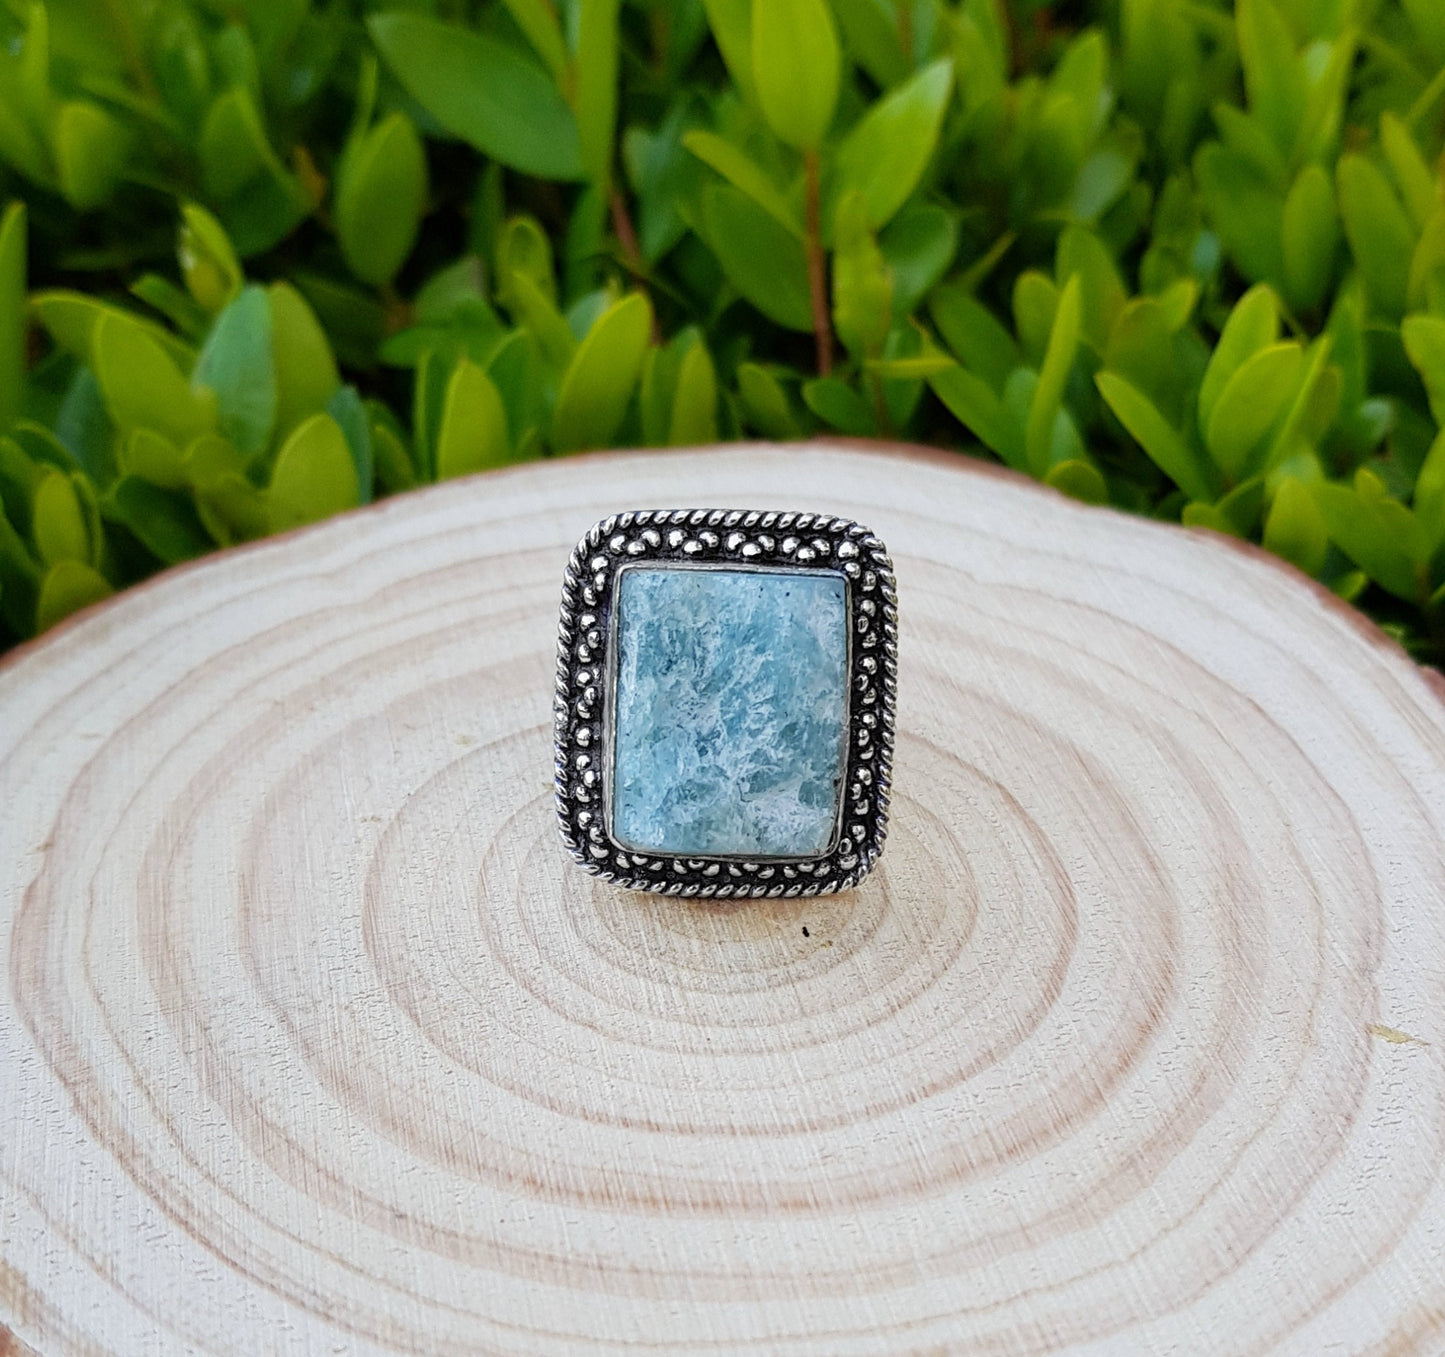 Blue Raw Apatite Ring In Sterling Silver Size US 8 Boho Crystal Ring Gemstone Ring Unique Gift For Women